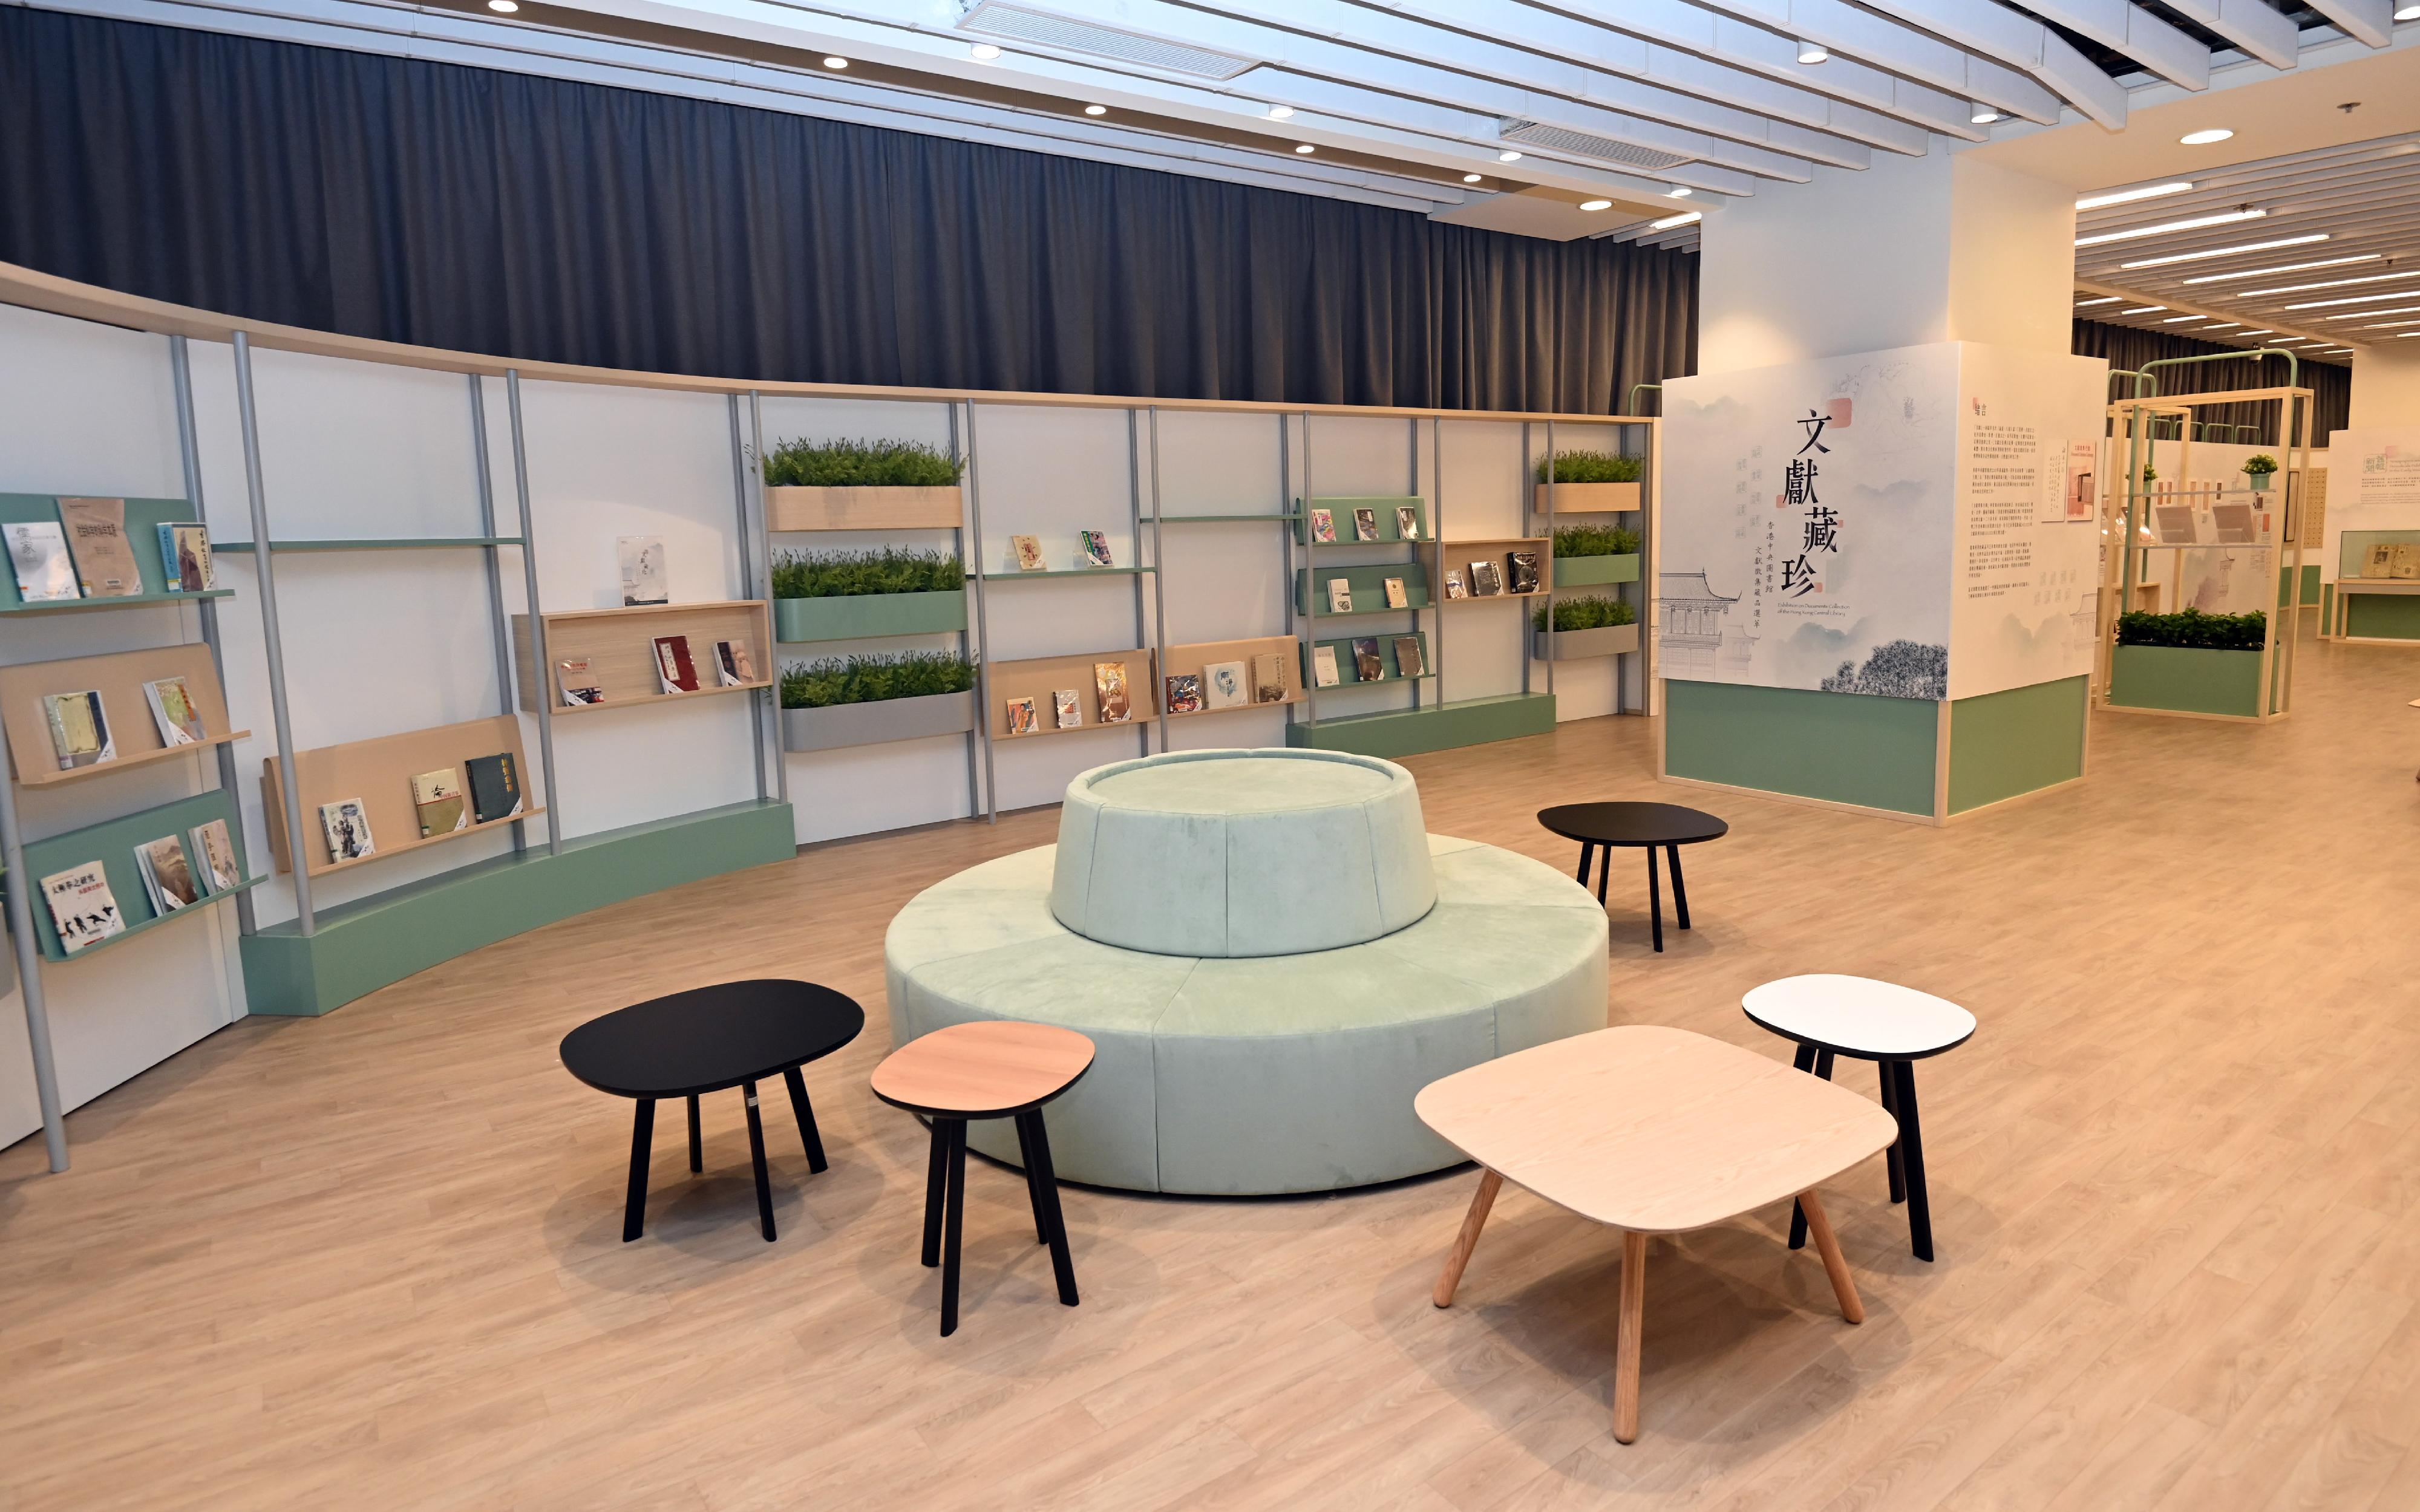 The Sham Shui Po Public Library will come into full operation on March 30 (Thursday). Photo shows the Multi-Purpose Display and Reading Area of the Hong Kong Central Library inside the Sham Shui Po Public Library. 